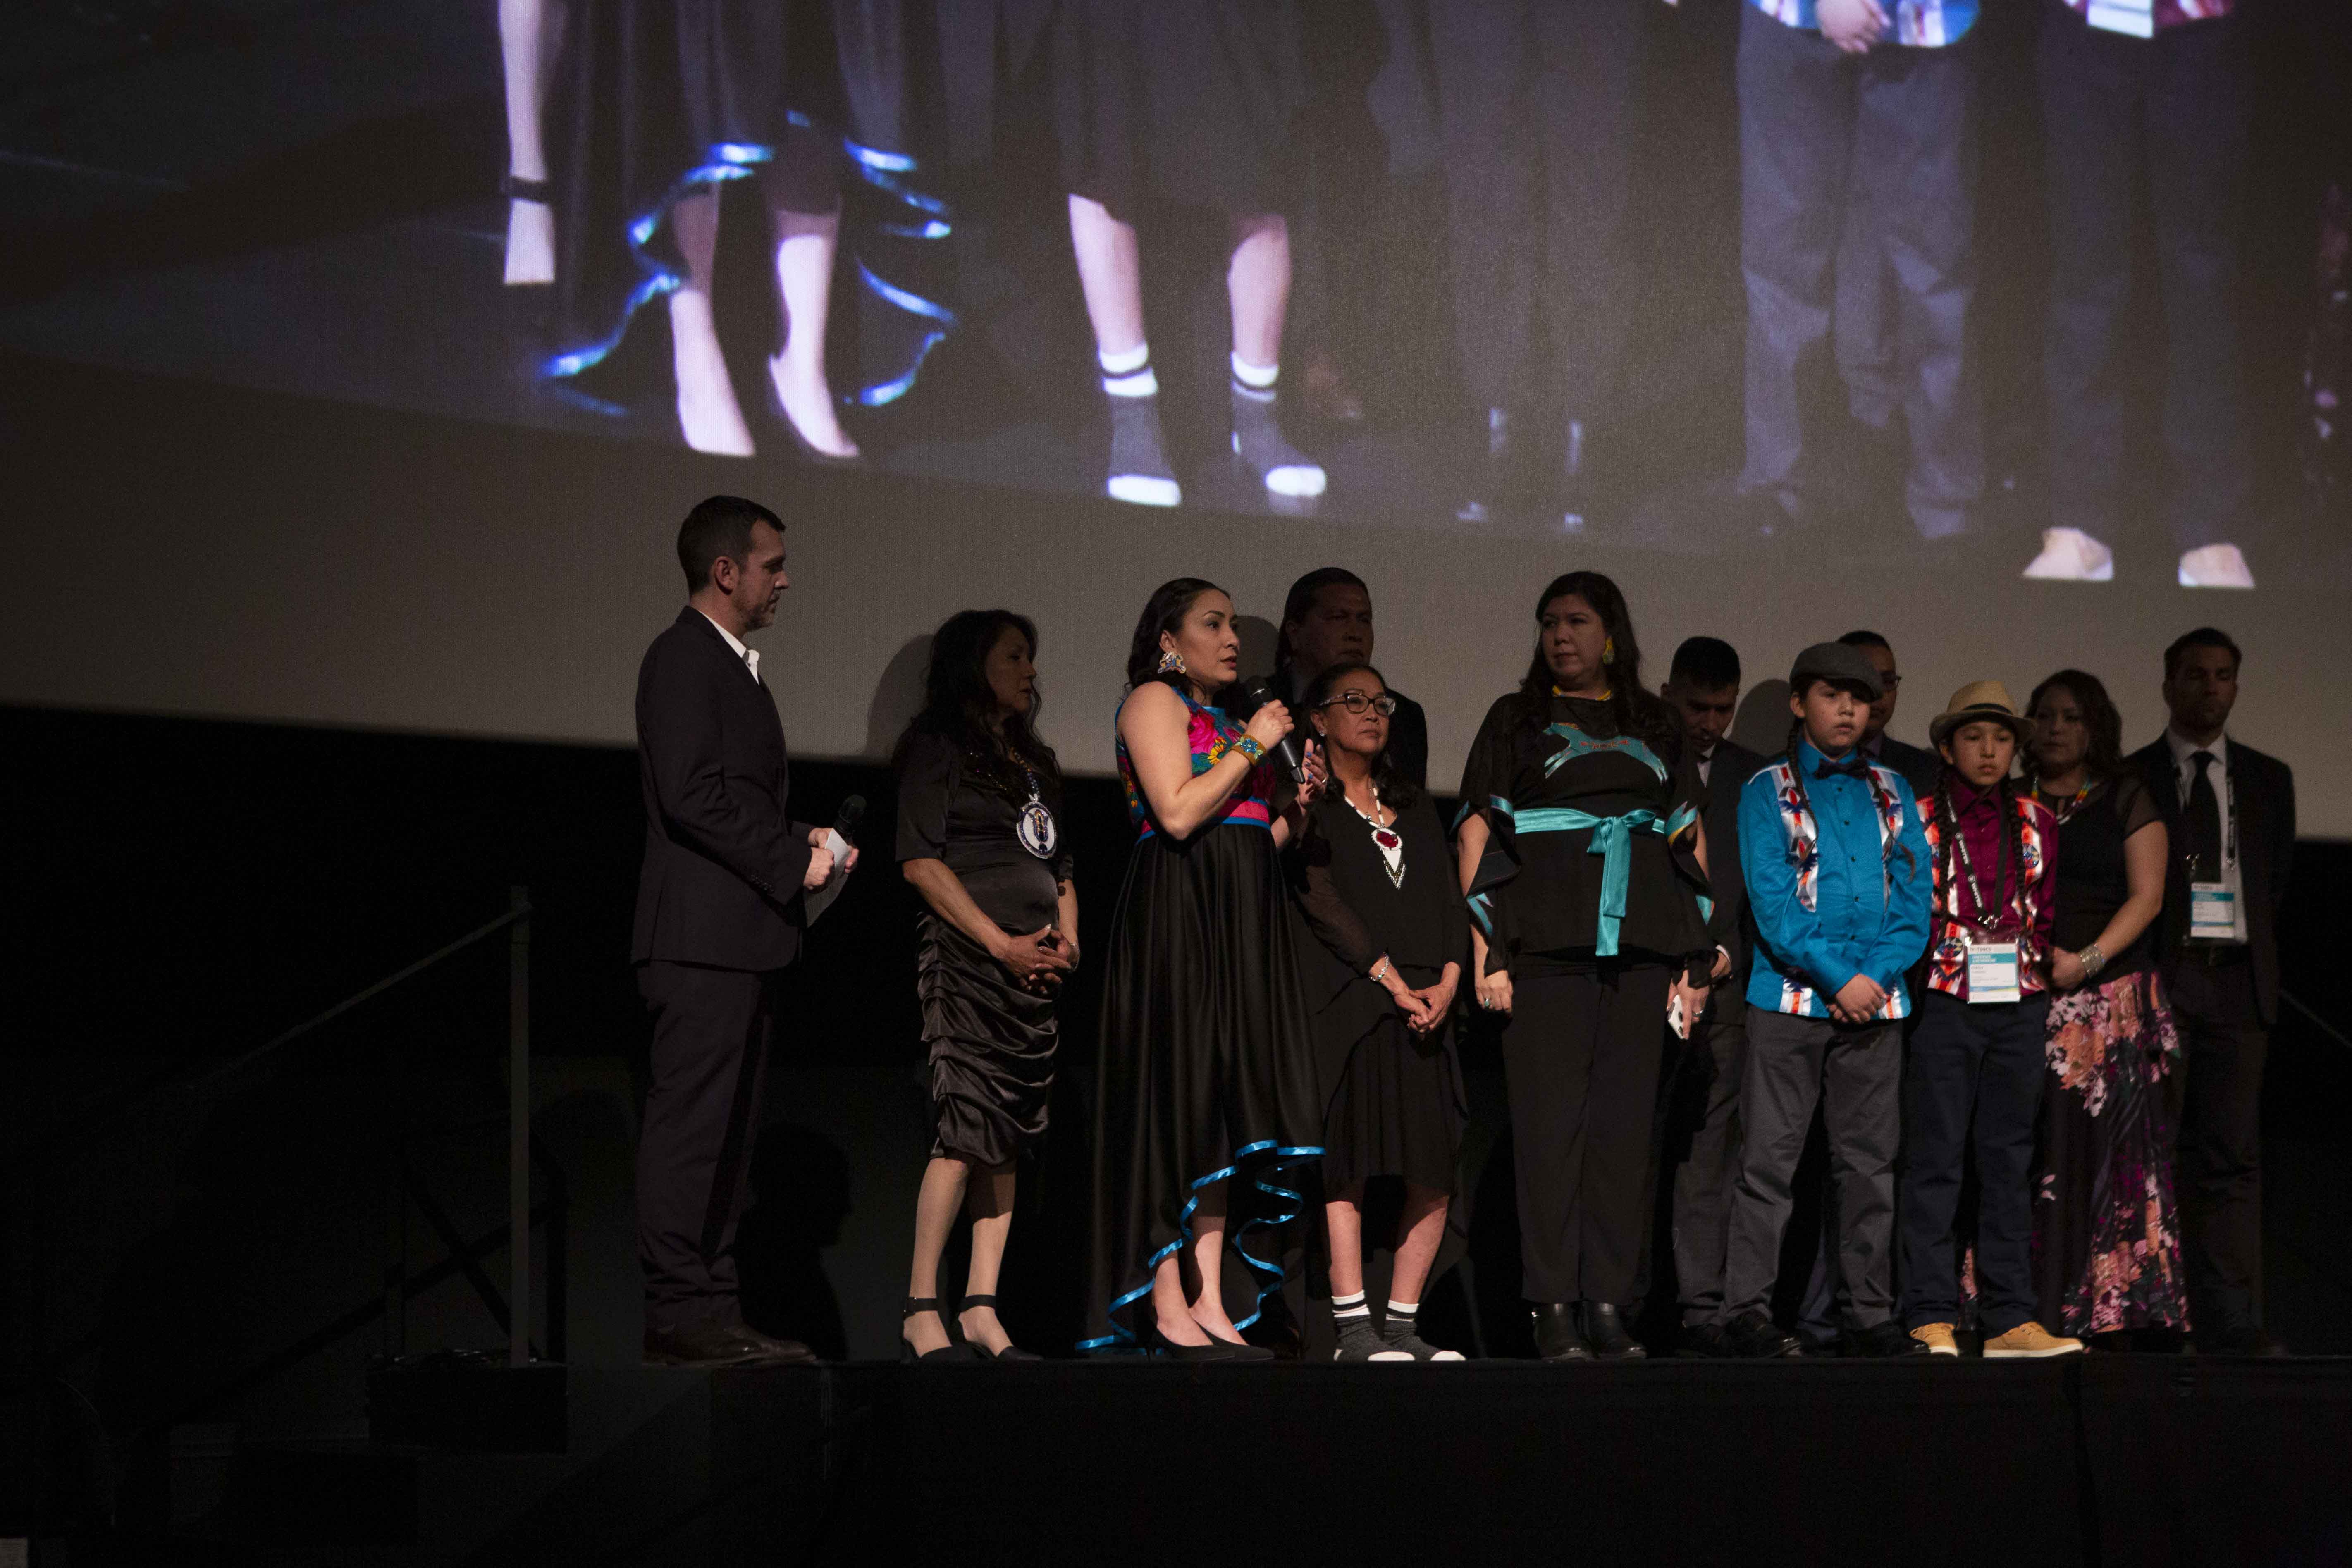 Colten Boushie's cousin, Jade Tootoosis answers a question from the audience at the HotDocs premiere of Tasha Hubbard's documentary nipawistamasowin: We Will Stand Up. (Photo by David Spowart, courtesy of Hot Docs).